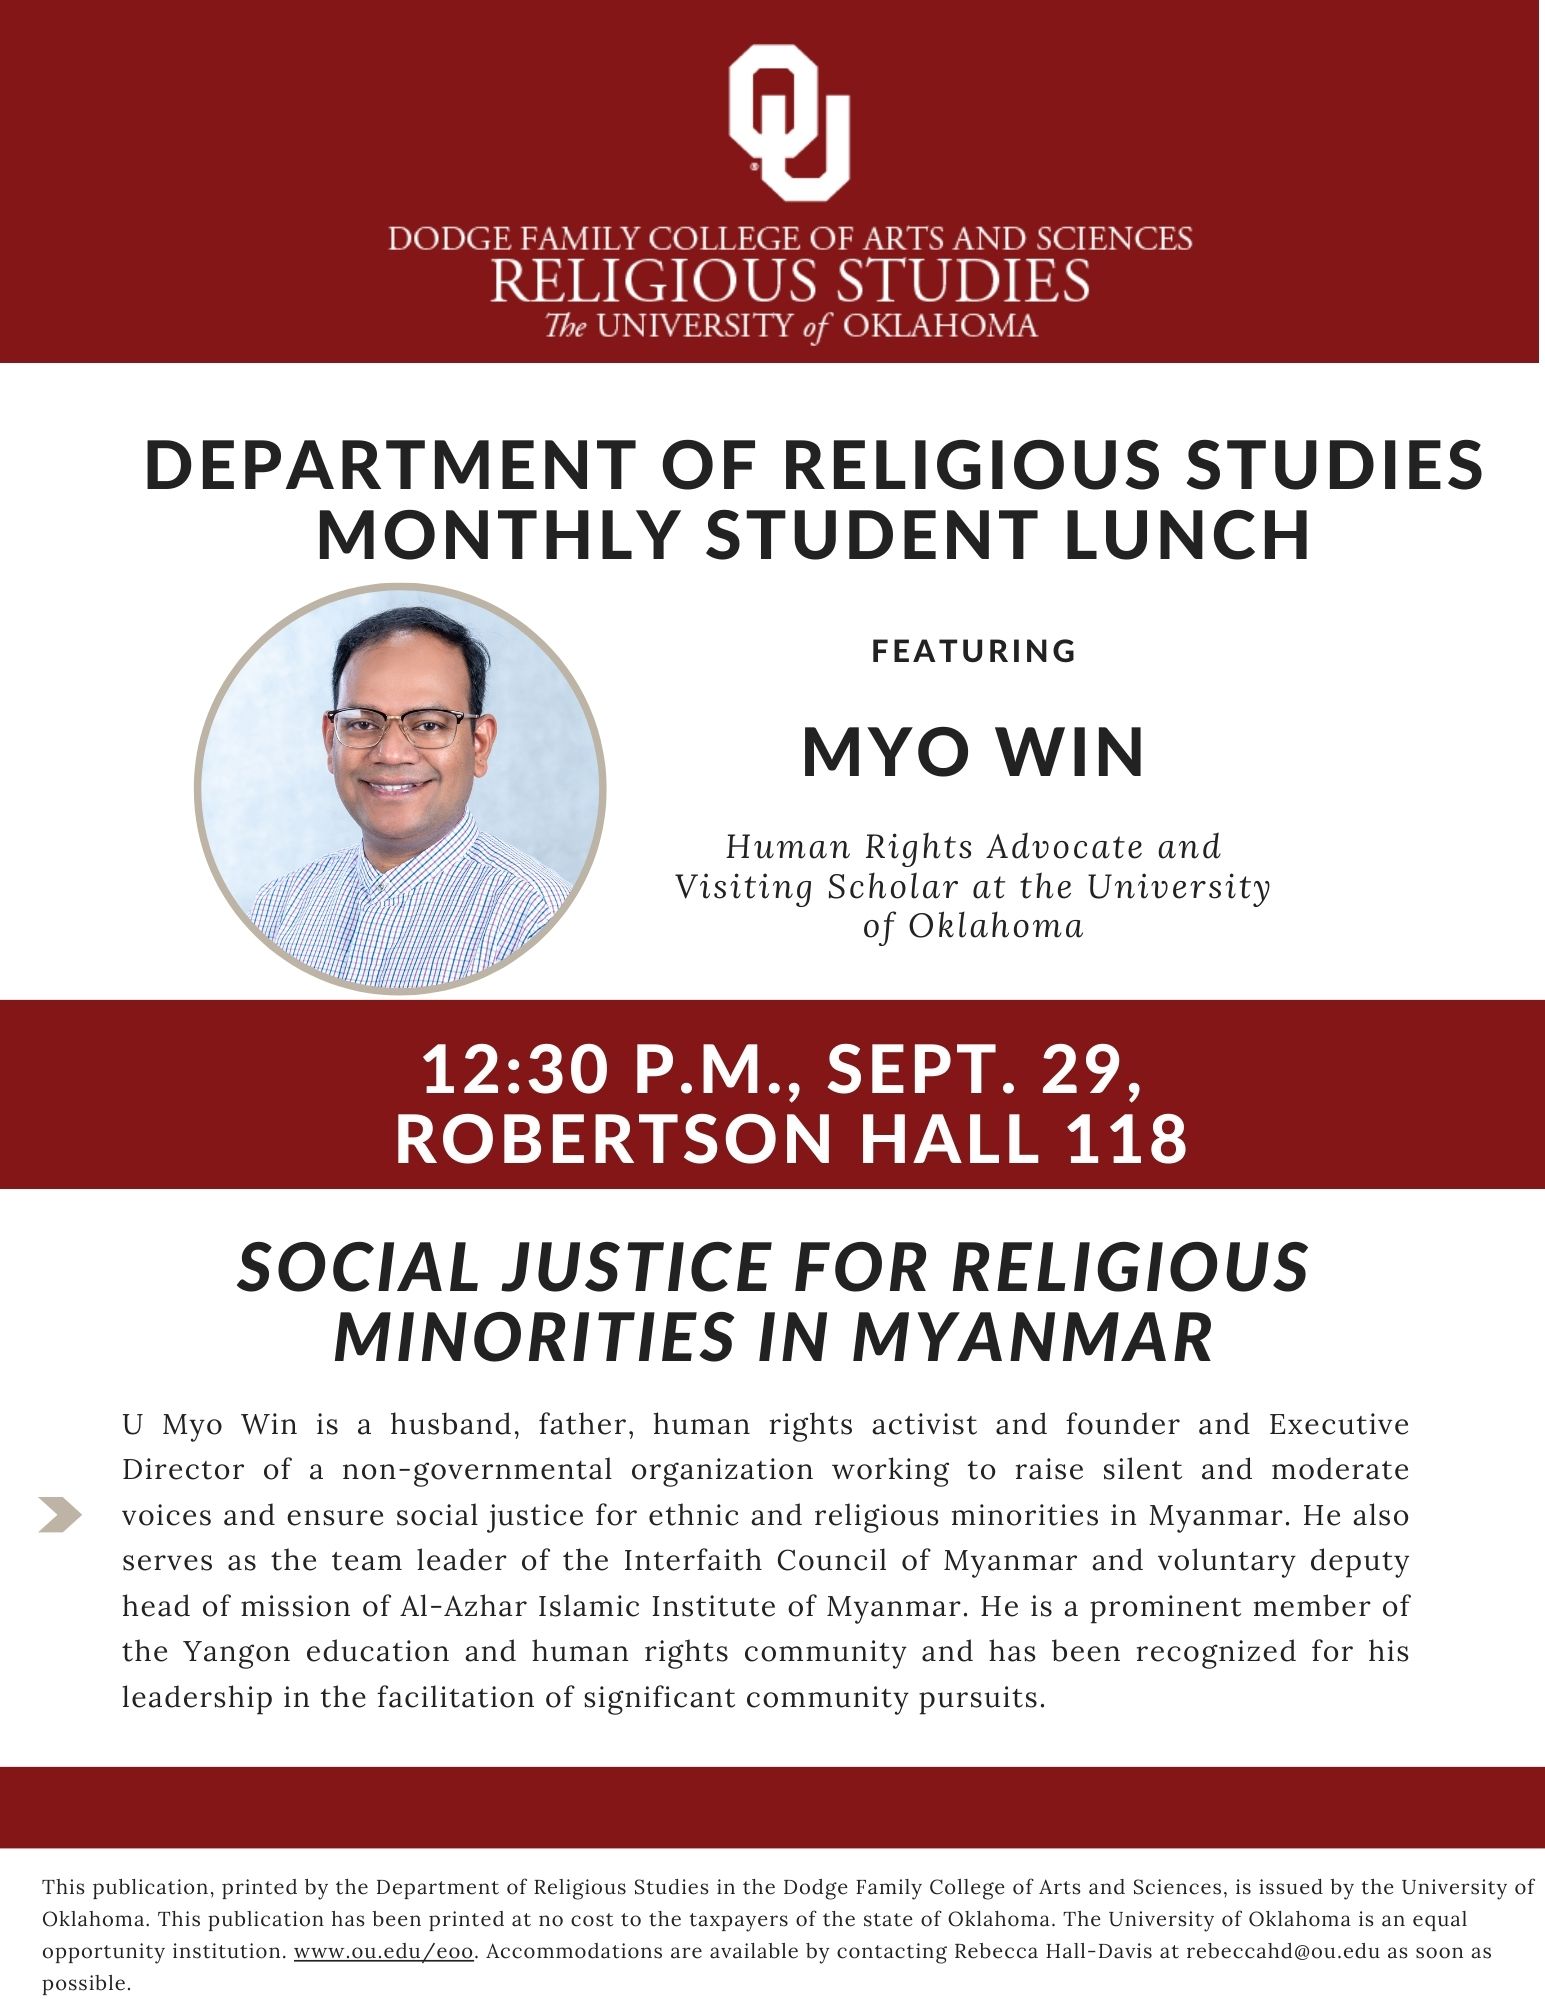 Join us for the Sept. 29 RELS Student Lunch with featured speaker Myo Win, a human rights activist and visiting scholar at OU, who works for social justice for ethnic and religious minorities in Myanmar.    RELS Student Lunch  "Social Justice for Religious Minorities in Myanmar"  Myo Win  12:30 p.m., Sept. 29  Robertson Hall 118